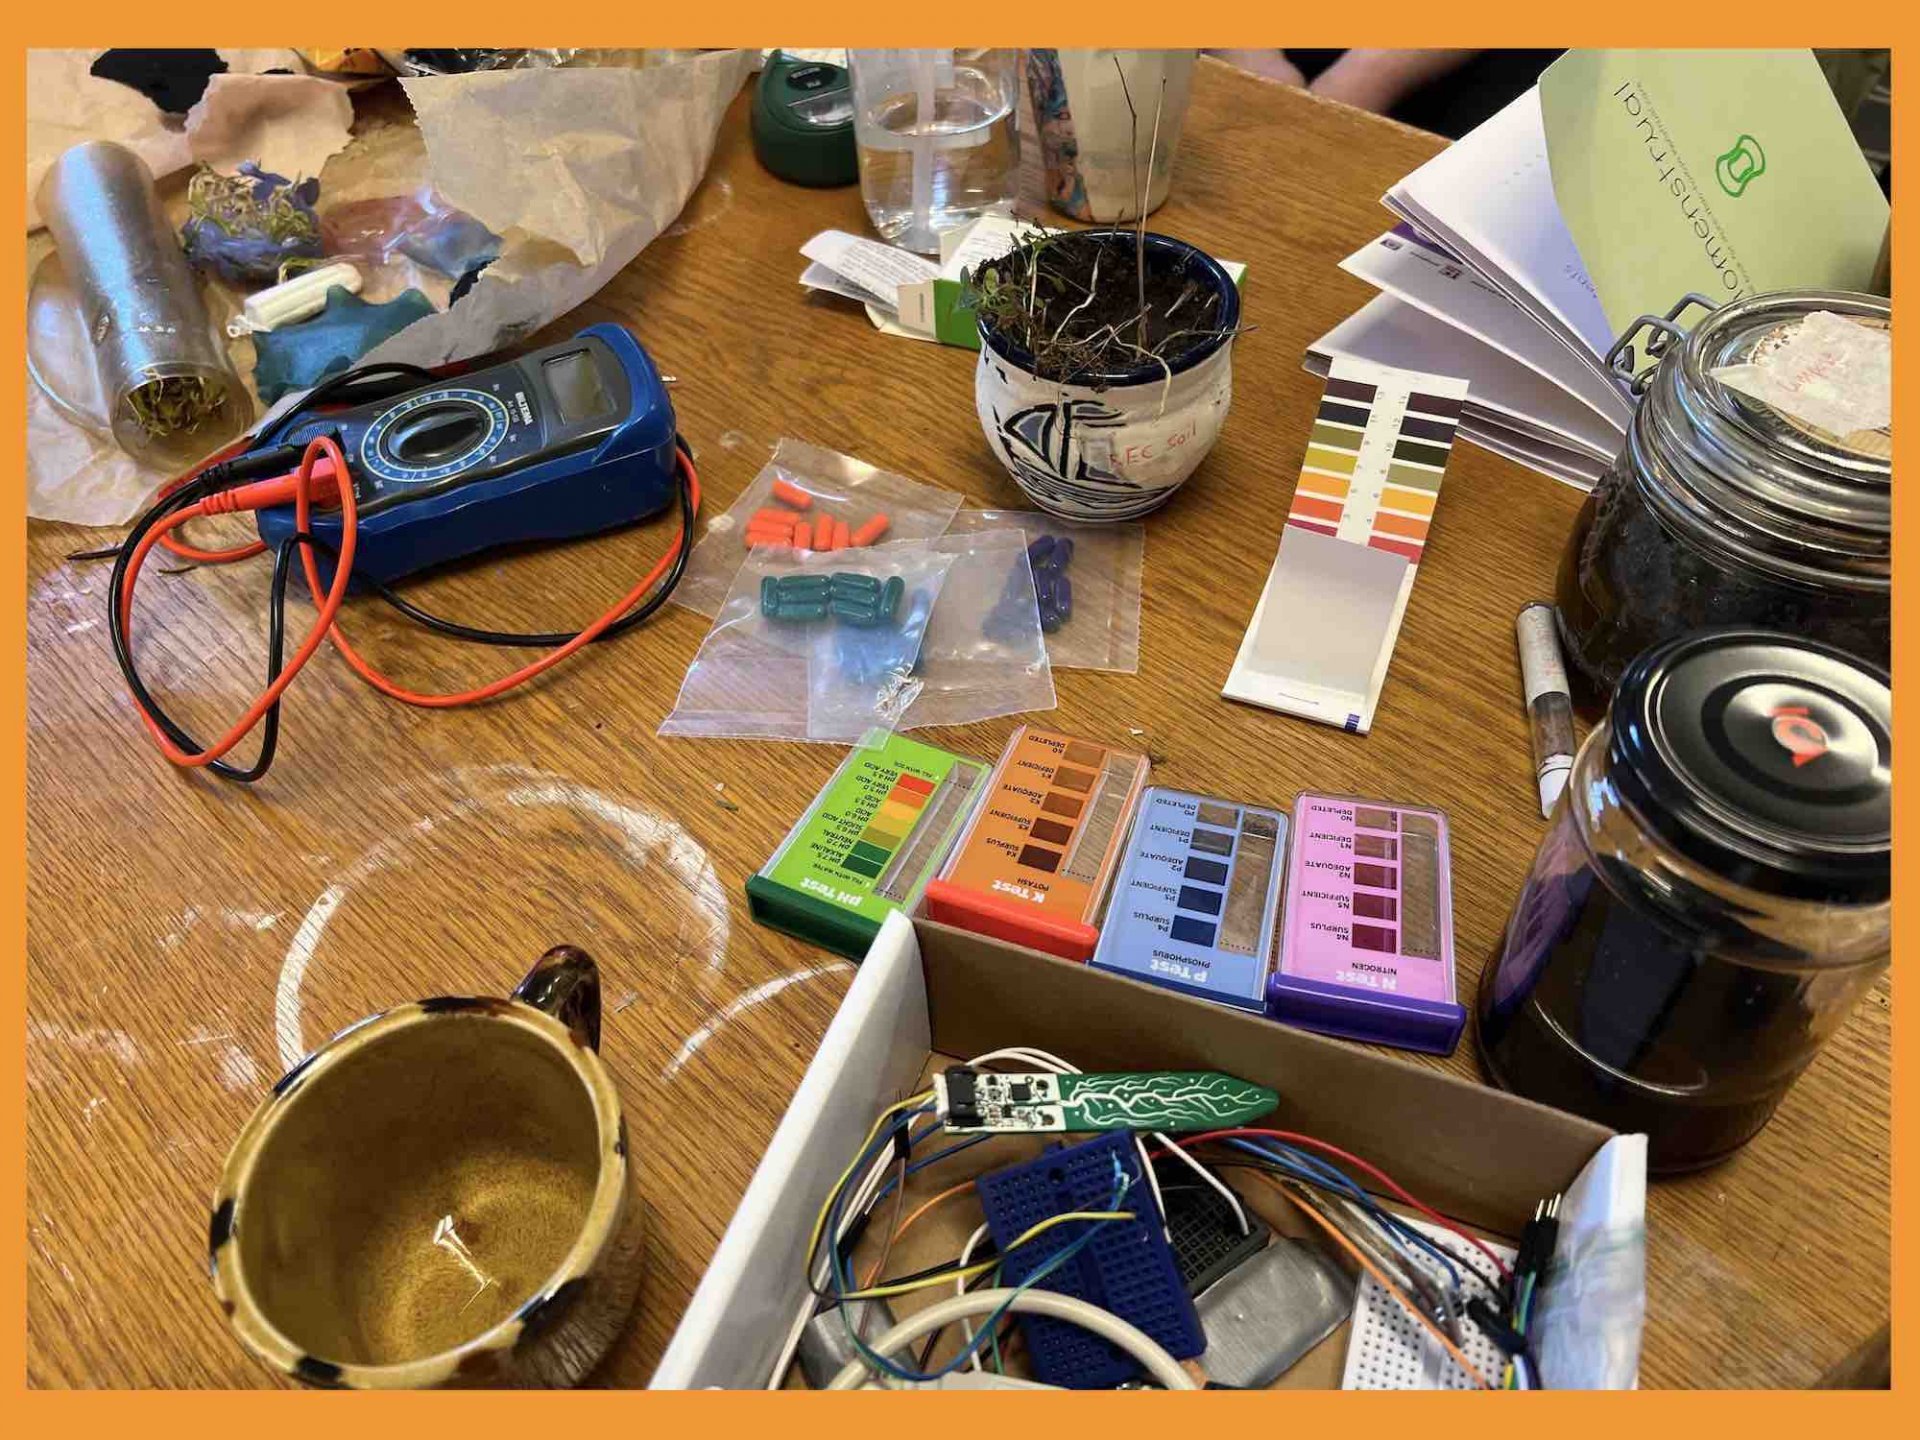 Busy studio table with NPK testing kits, soil samples and electronics